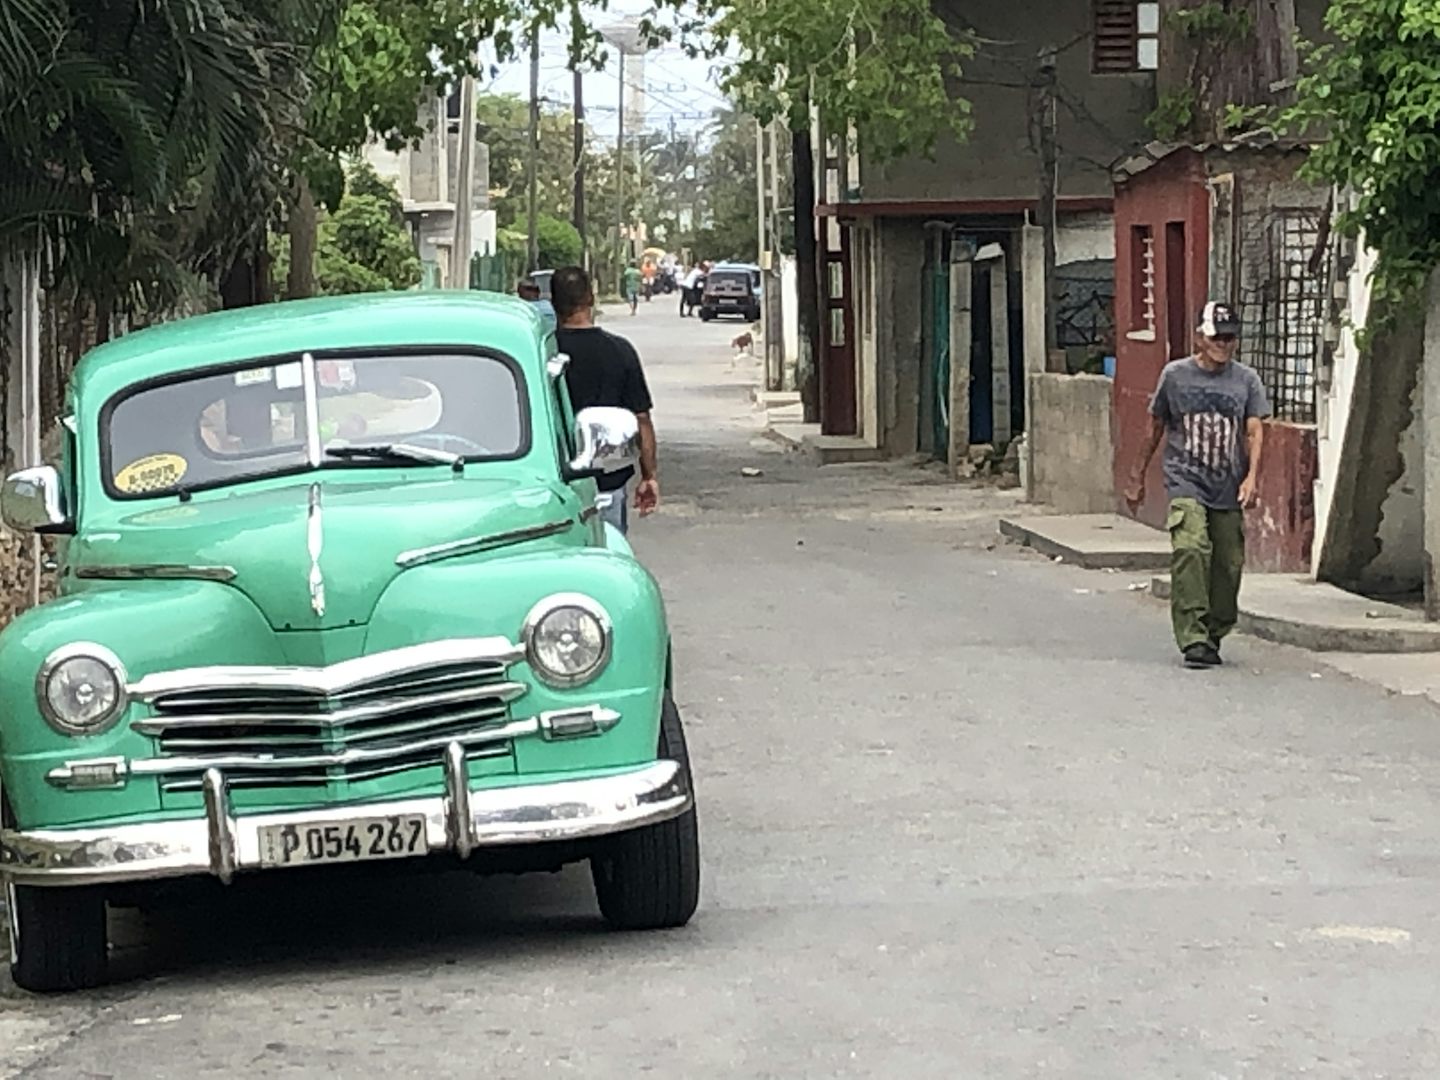 Classic car (late 40s Plymouth) in Havana